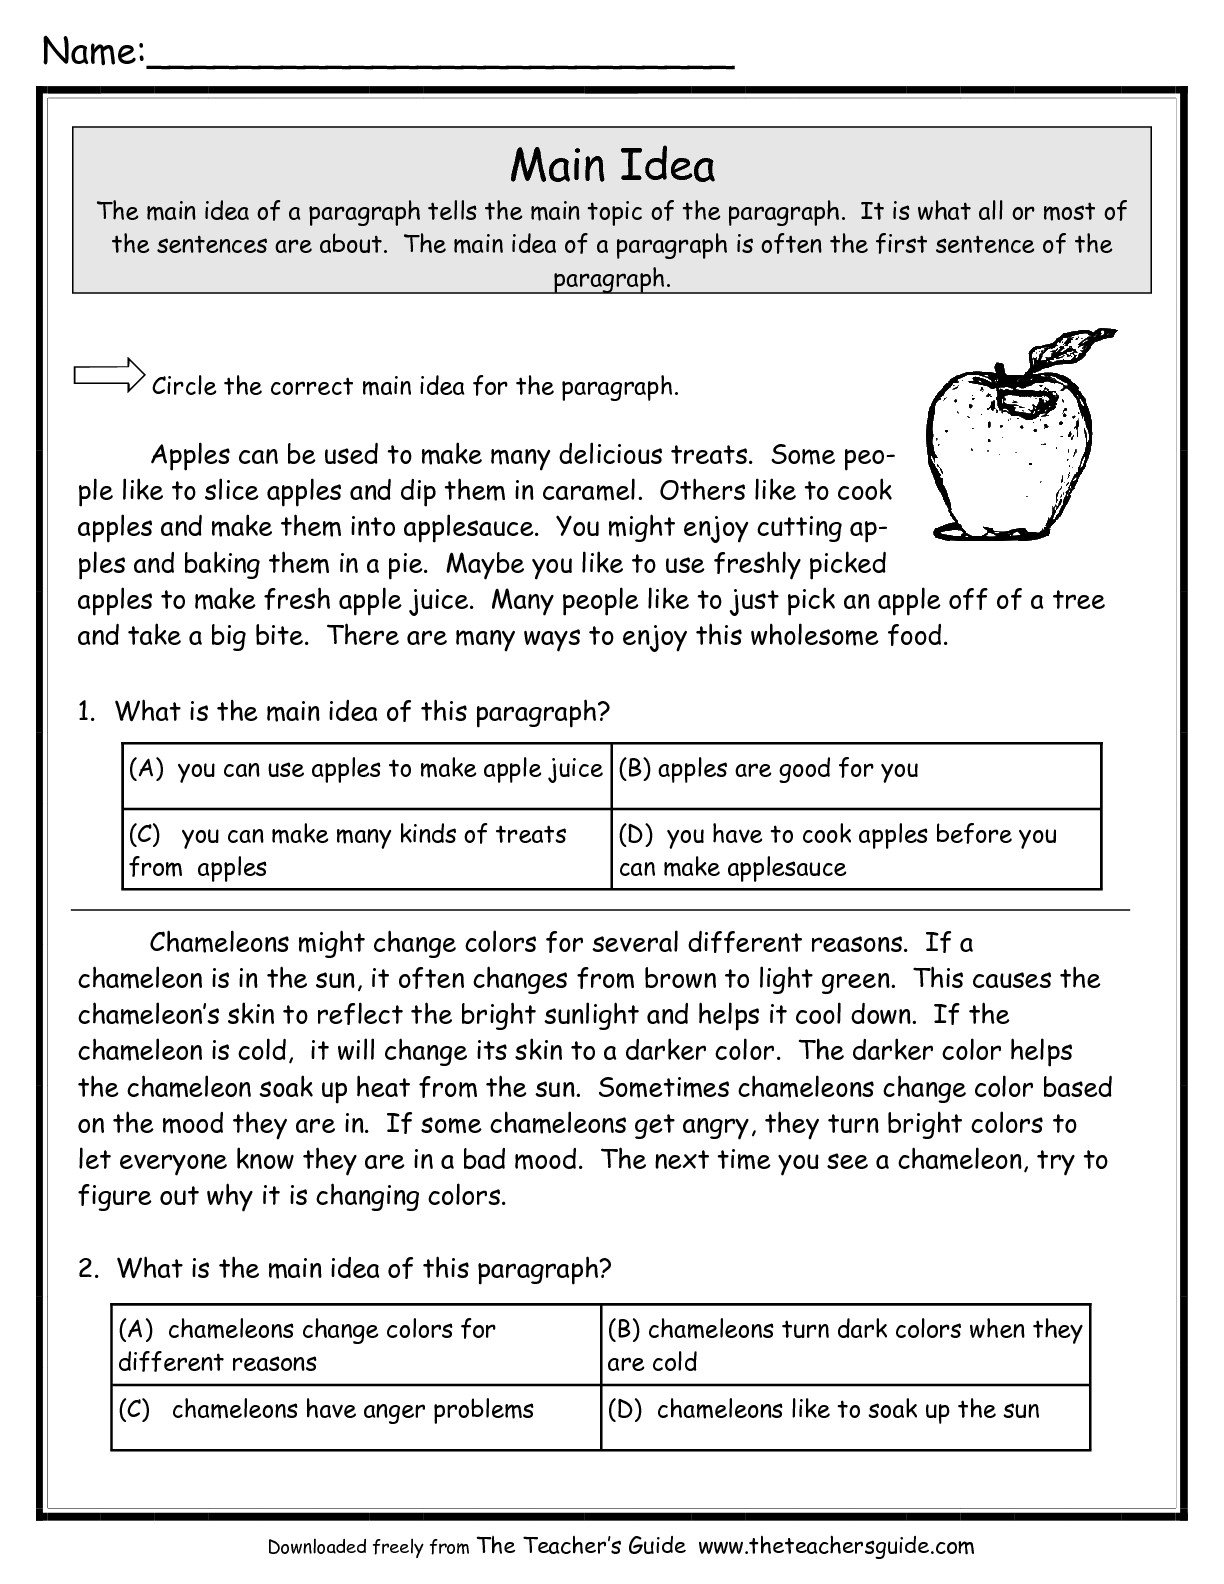 10 Ideal Main Idea And Supporting Details Passages main idea worksheets from the teachers guide 7 2022